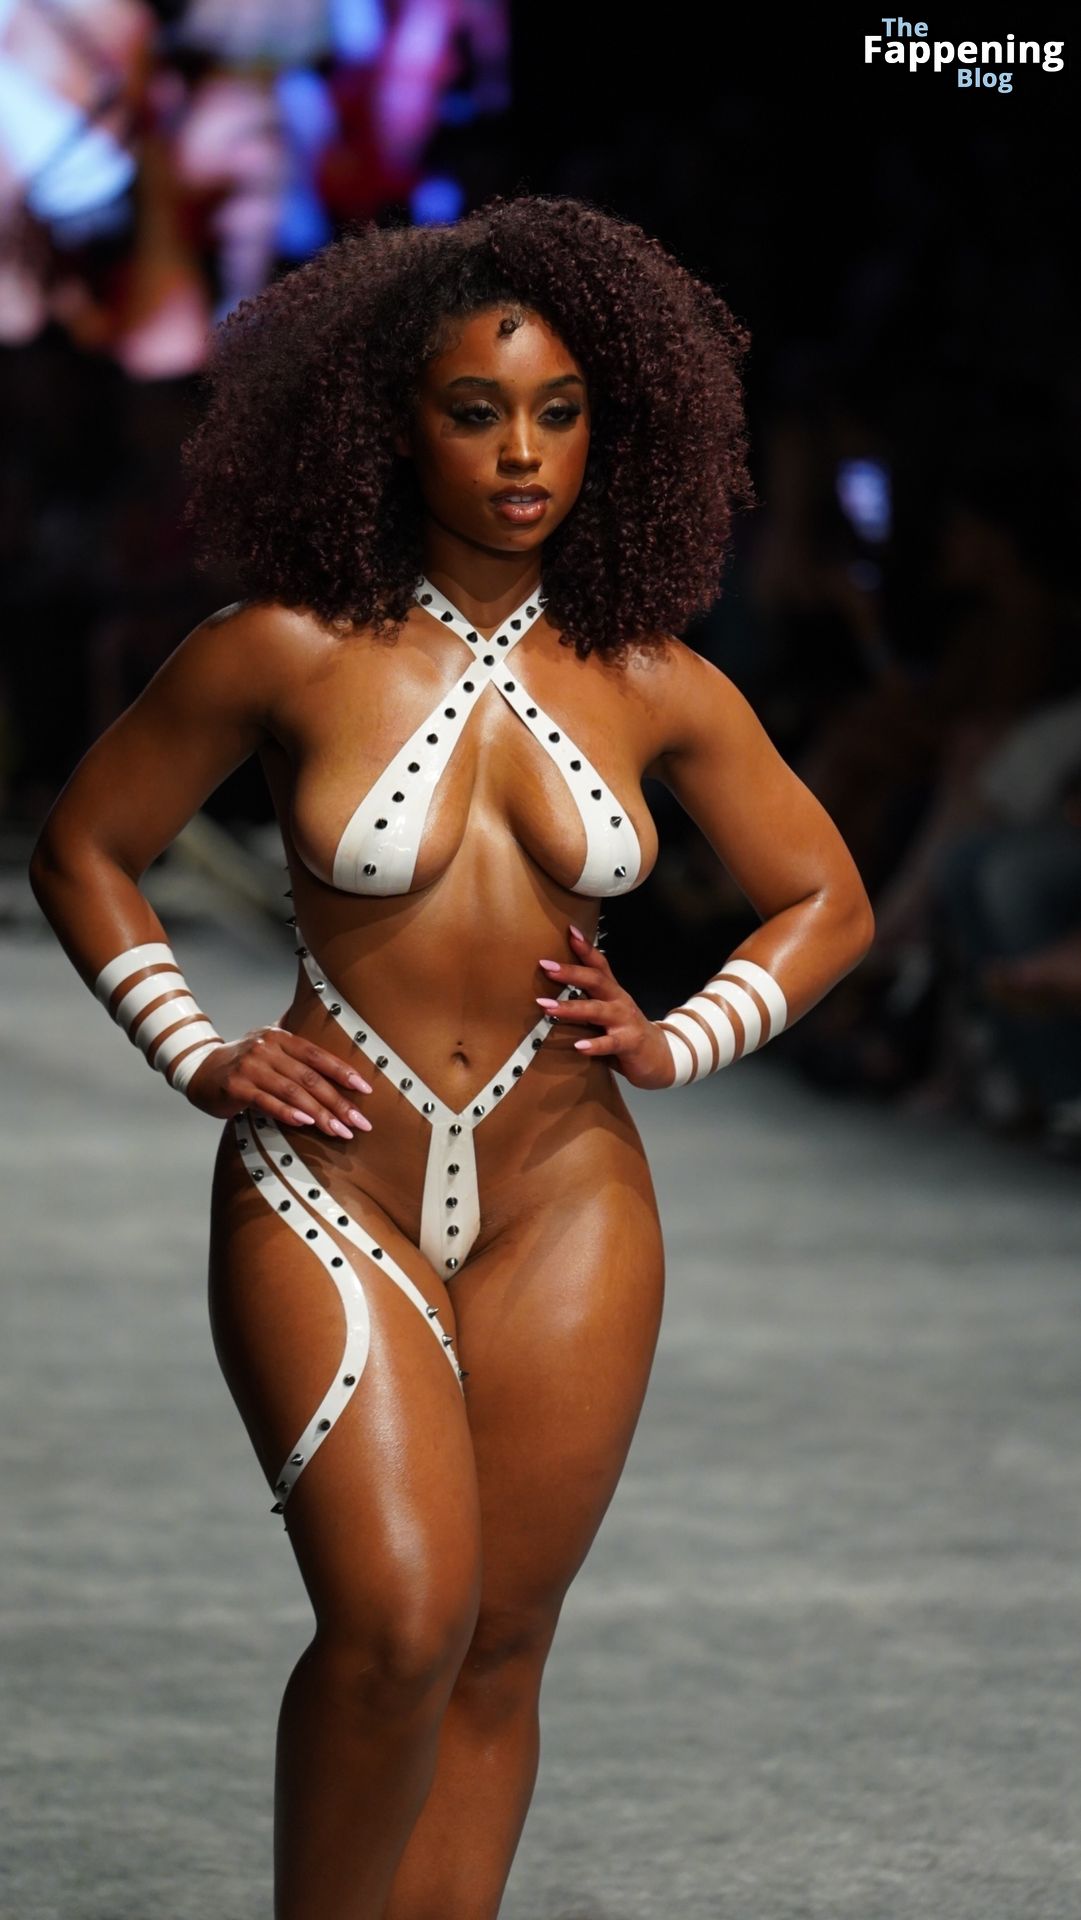 Models Walk in Nothing But Tape for Miami Swim Week Black Tape Project (60 Photos)